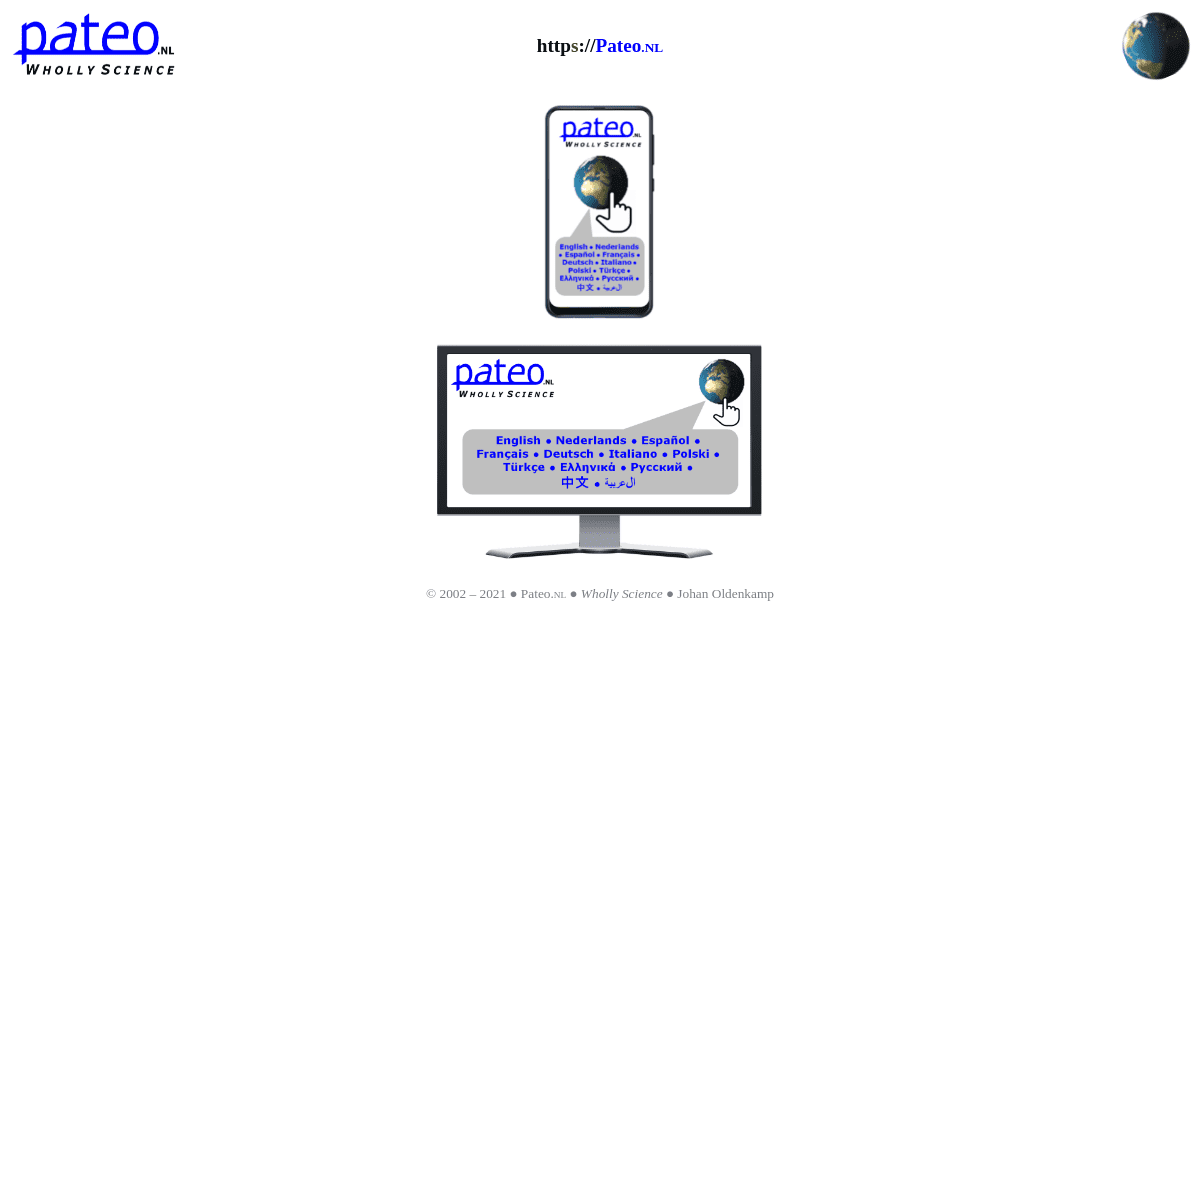 A complete backup of https://pateo.nl